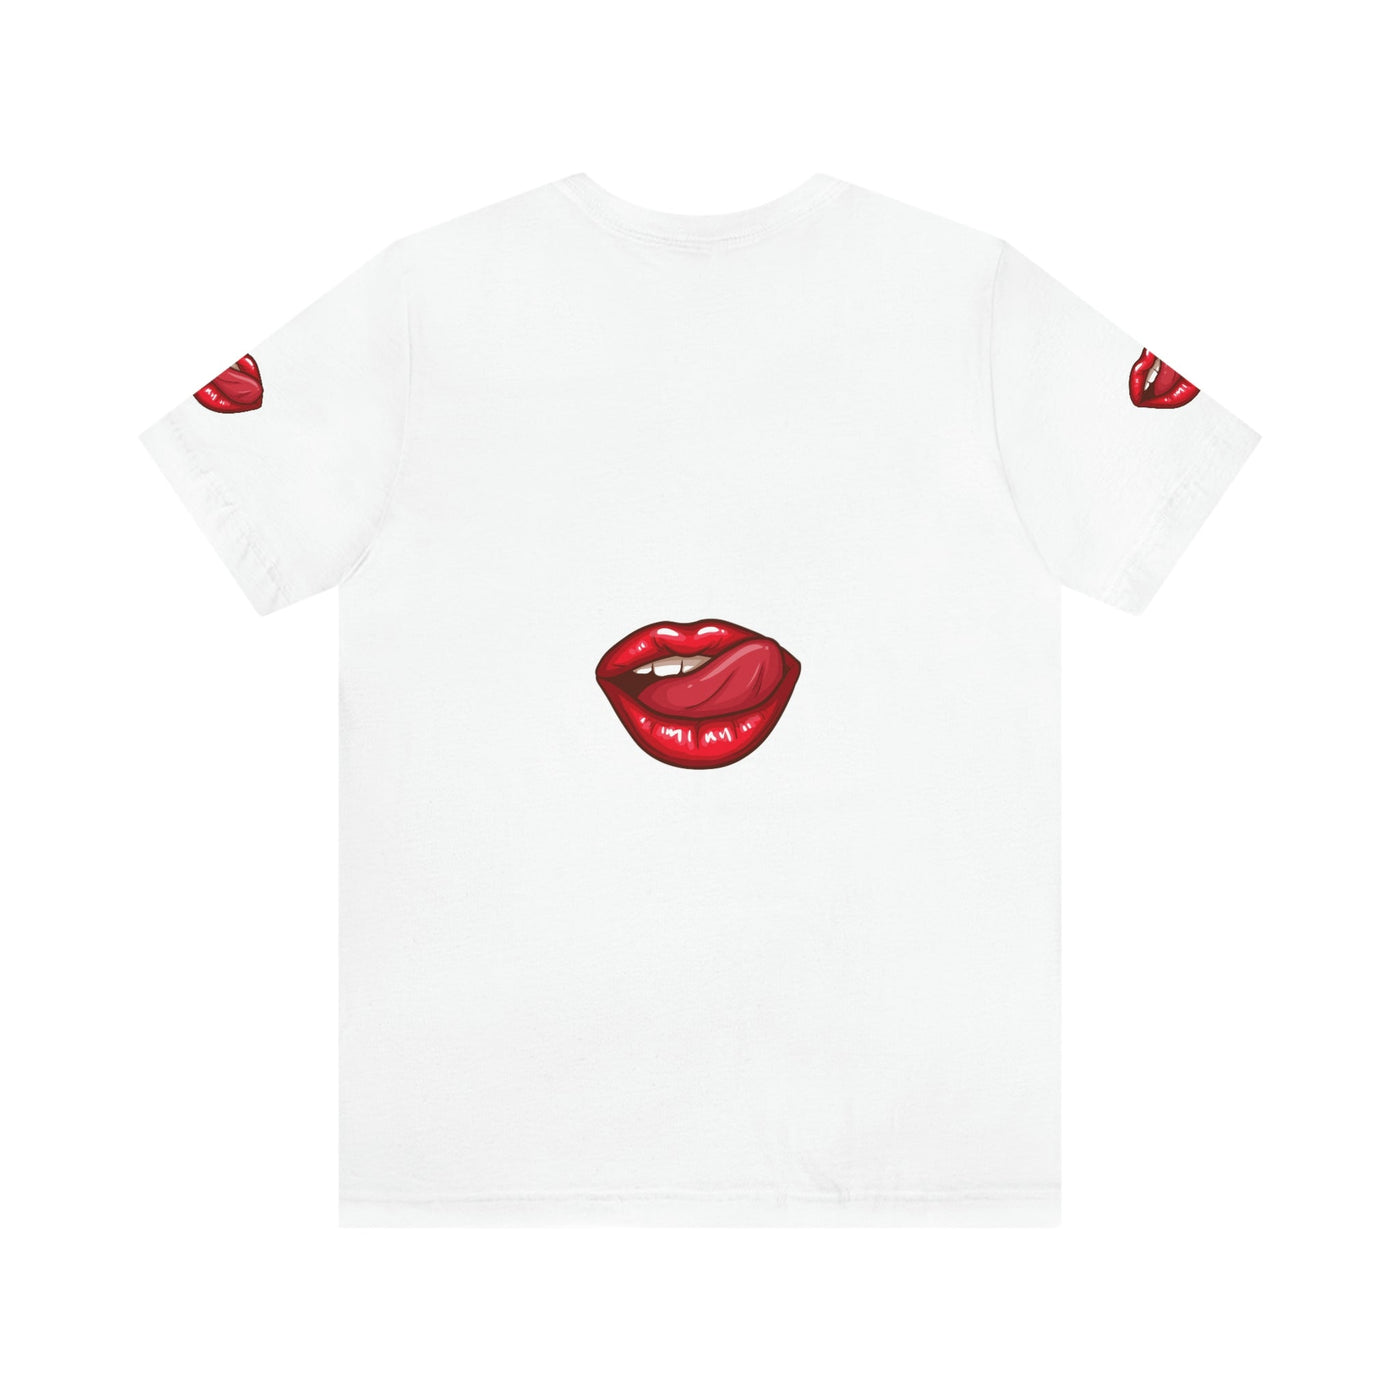 The Vision Slayer All Premium Limited Edition Kiss Me World White T-Shirt